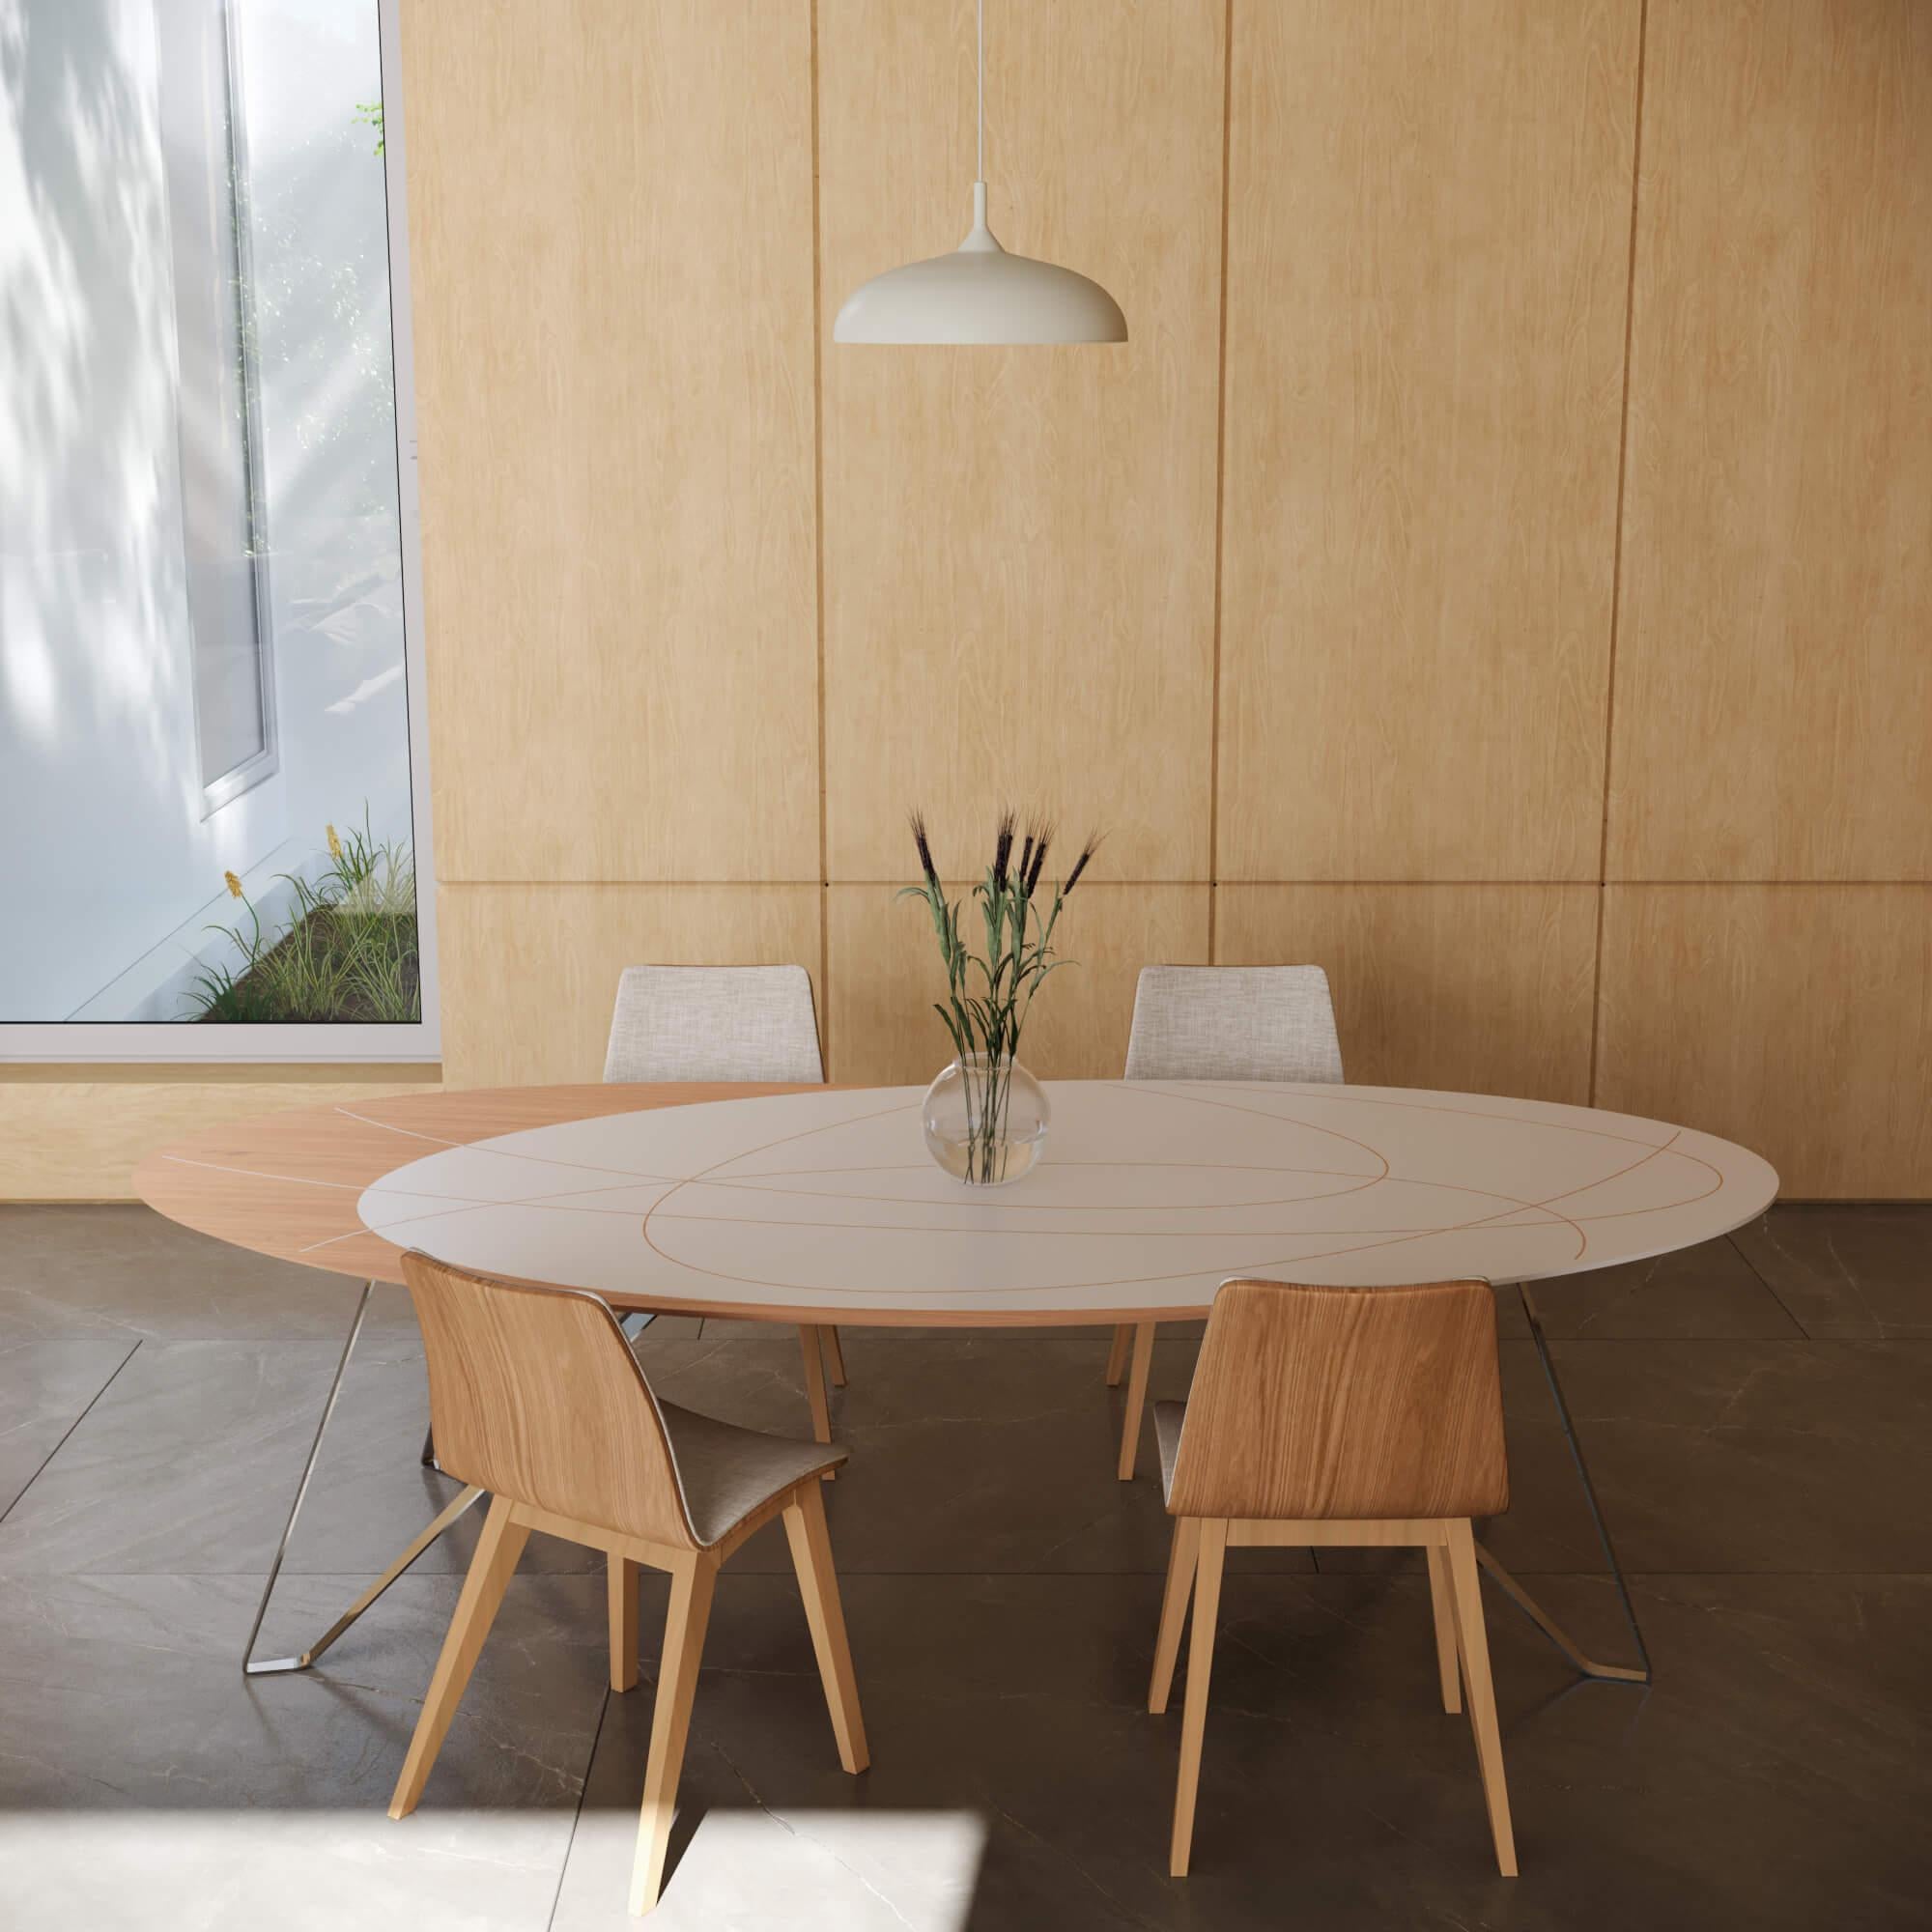 Modern Oval-Shaped Dining Table Oak Wood White Lacquer Polished Stainless Steel In New Condition For Sale In Vila Nova Famalicão, PT